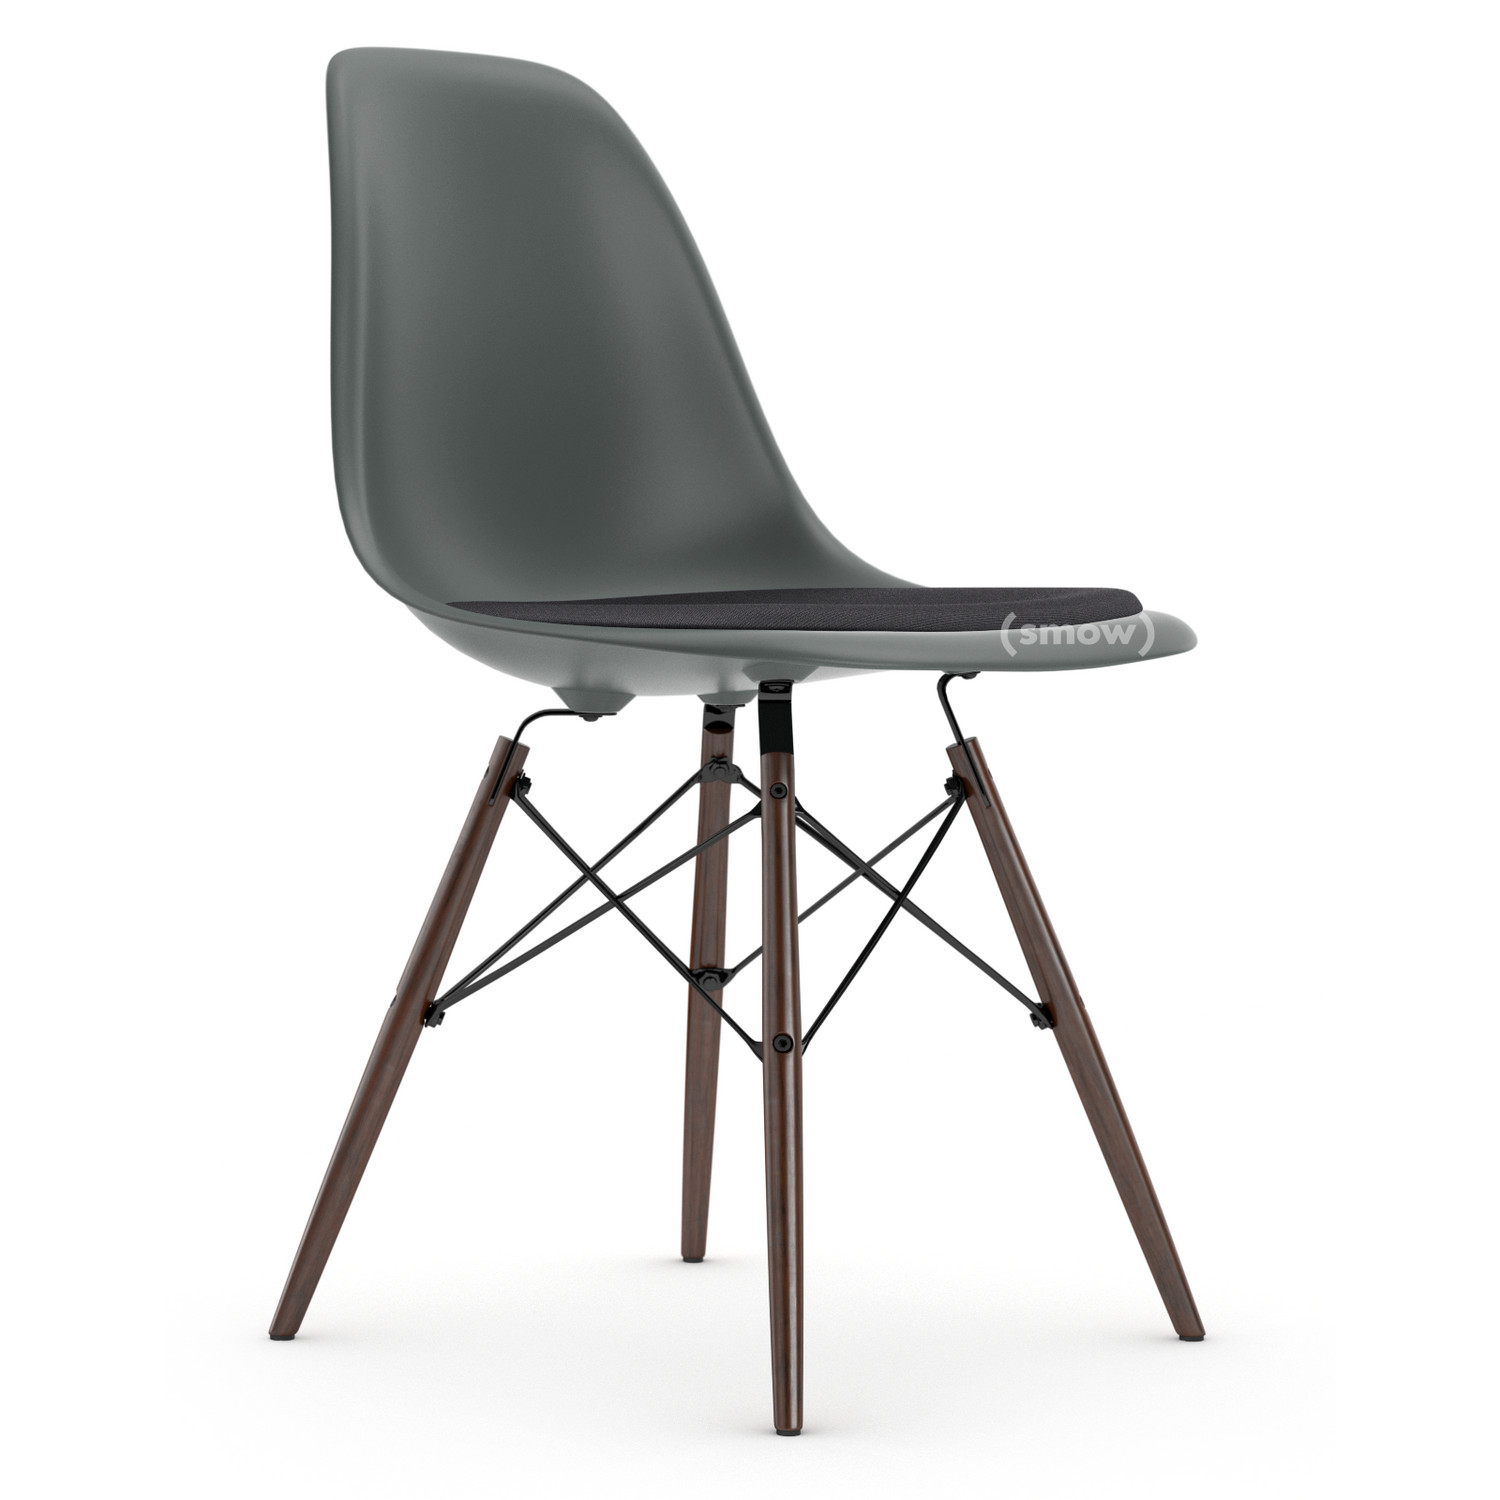 Handschrift Delegatie Afleiding Vitra Eames Plastic Side Chair DSW, Granite grey, With seat upholstery,  Dark grey, Standard version - 43 cm, Dark maple by Charles & Ray Eames,  1950 - Designer furniture by smow.com